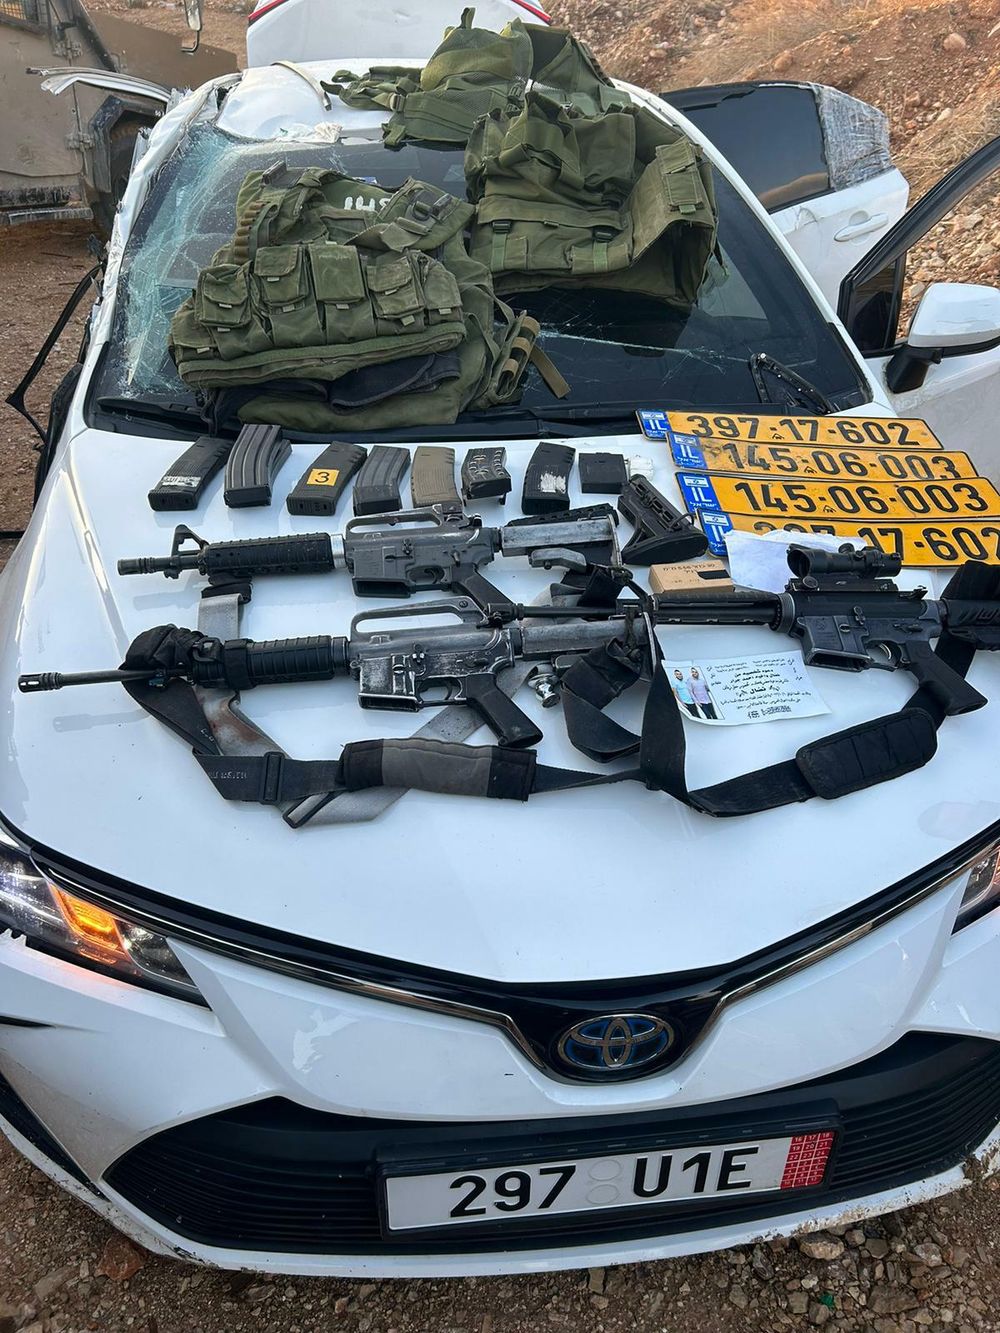 Weapons that were confiscated at the entrance to a hospital, after terrorists tried to escape with them into the hospital area.